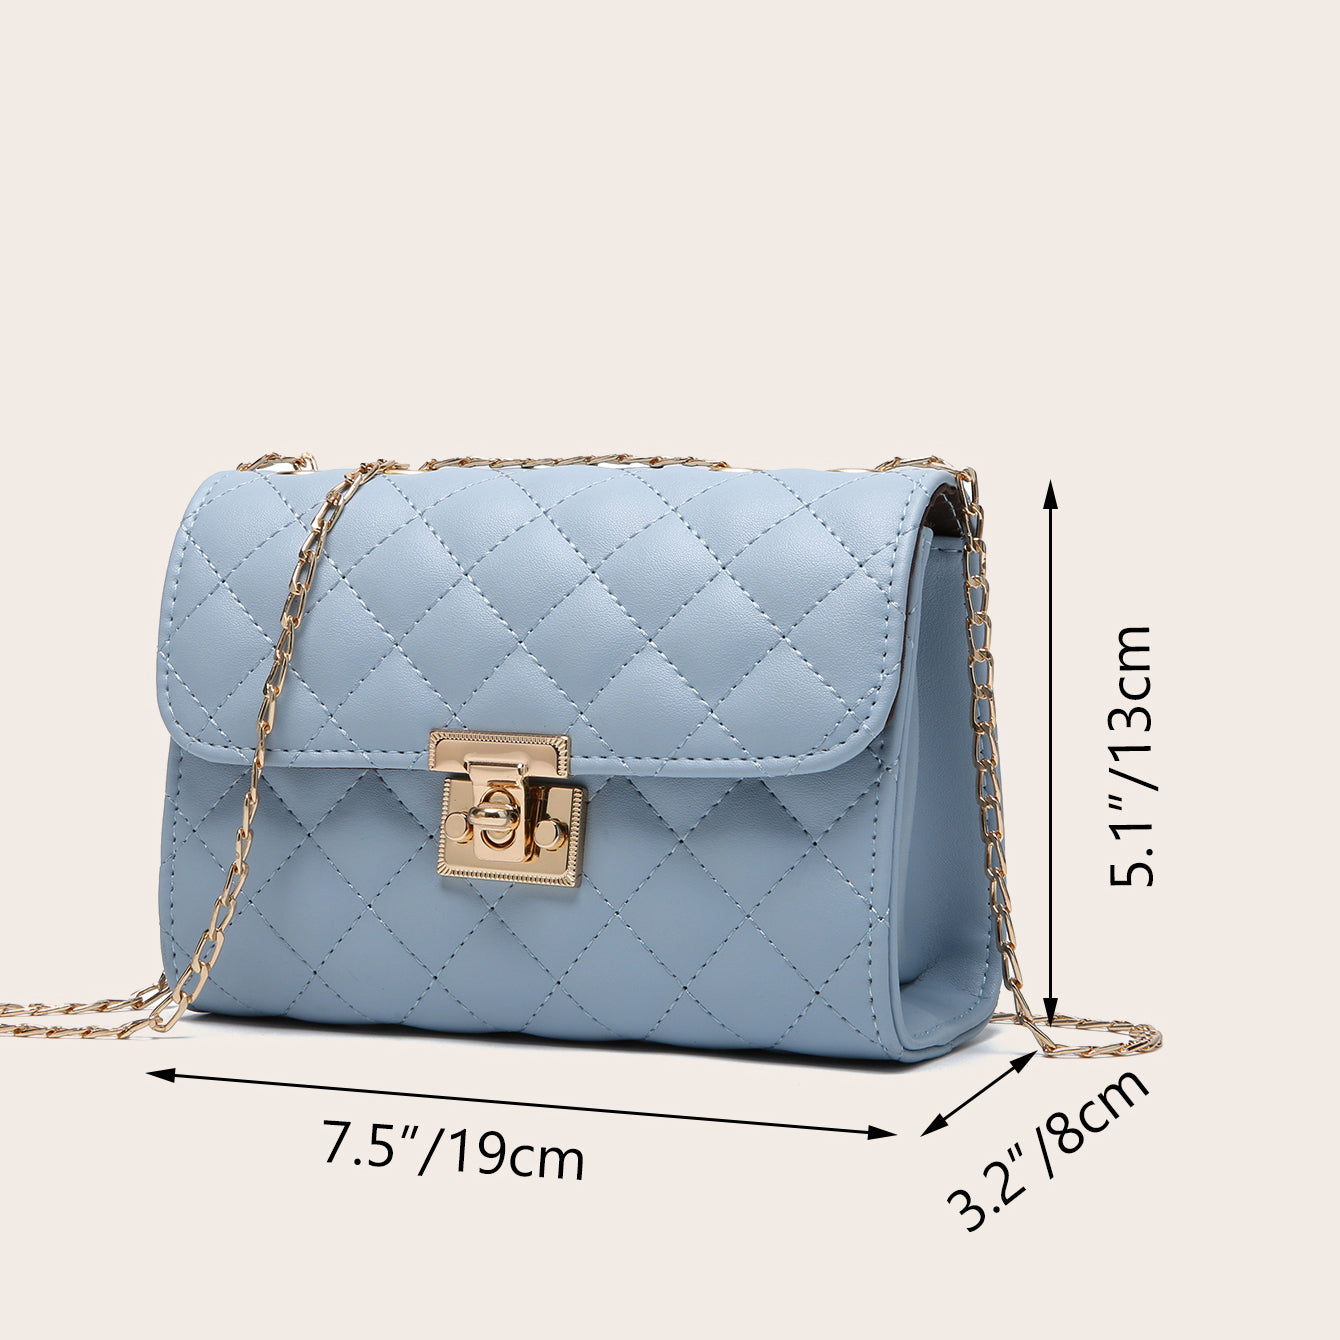 Ladies Quilted Crossbody Bag, Fashionable Chain Clutch Bag, Shoulder Bag, Square Bag